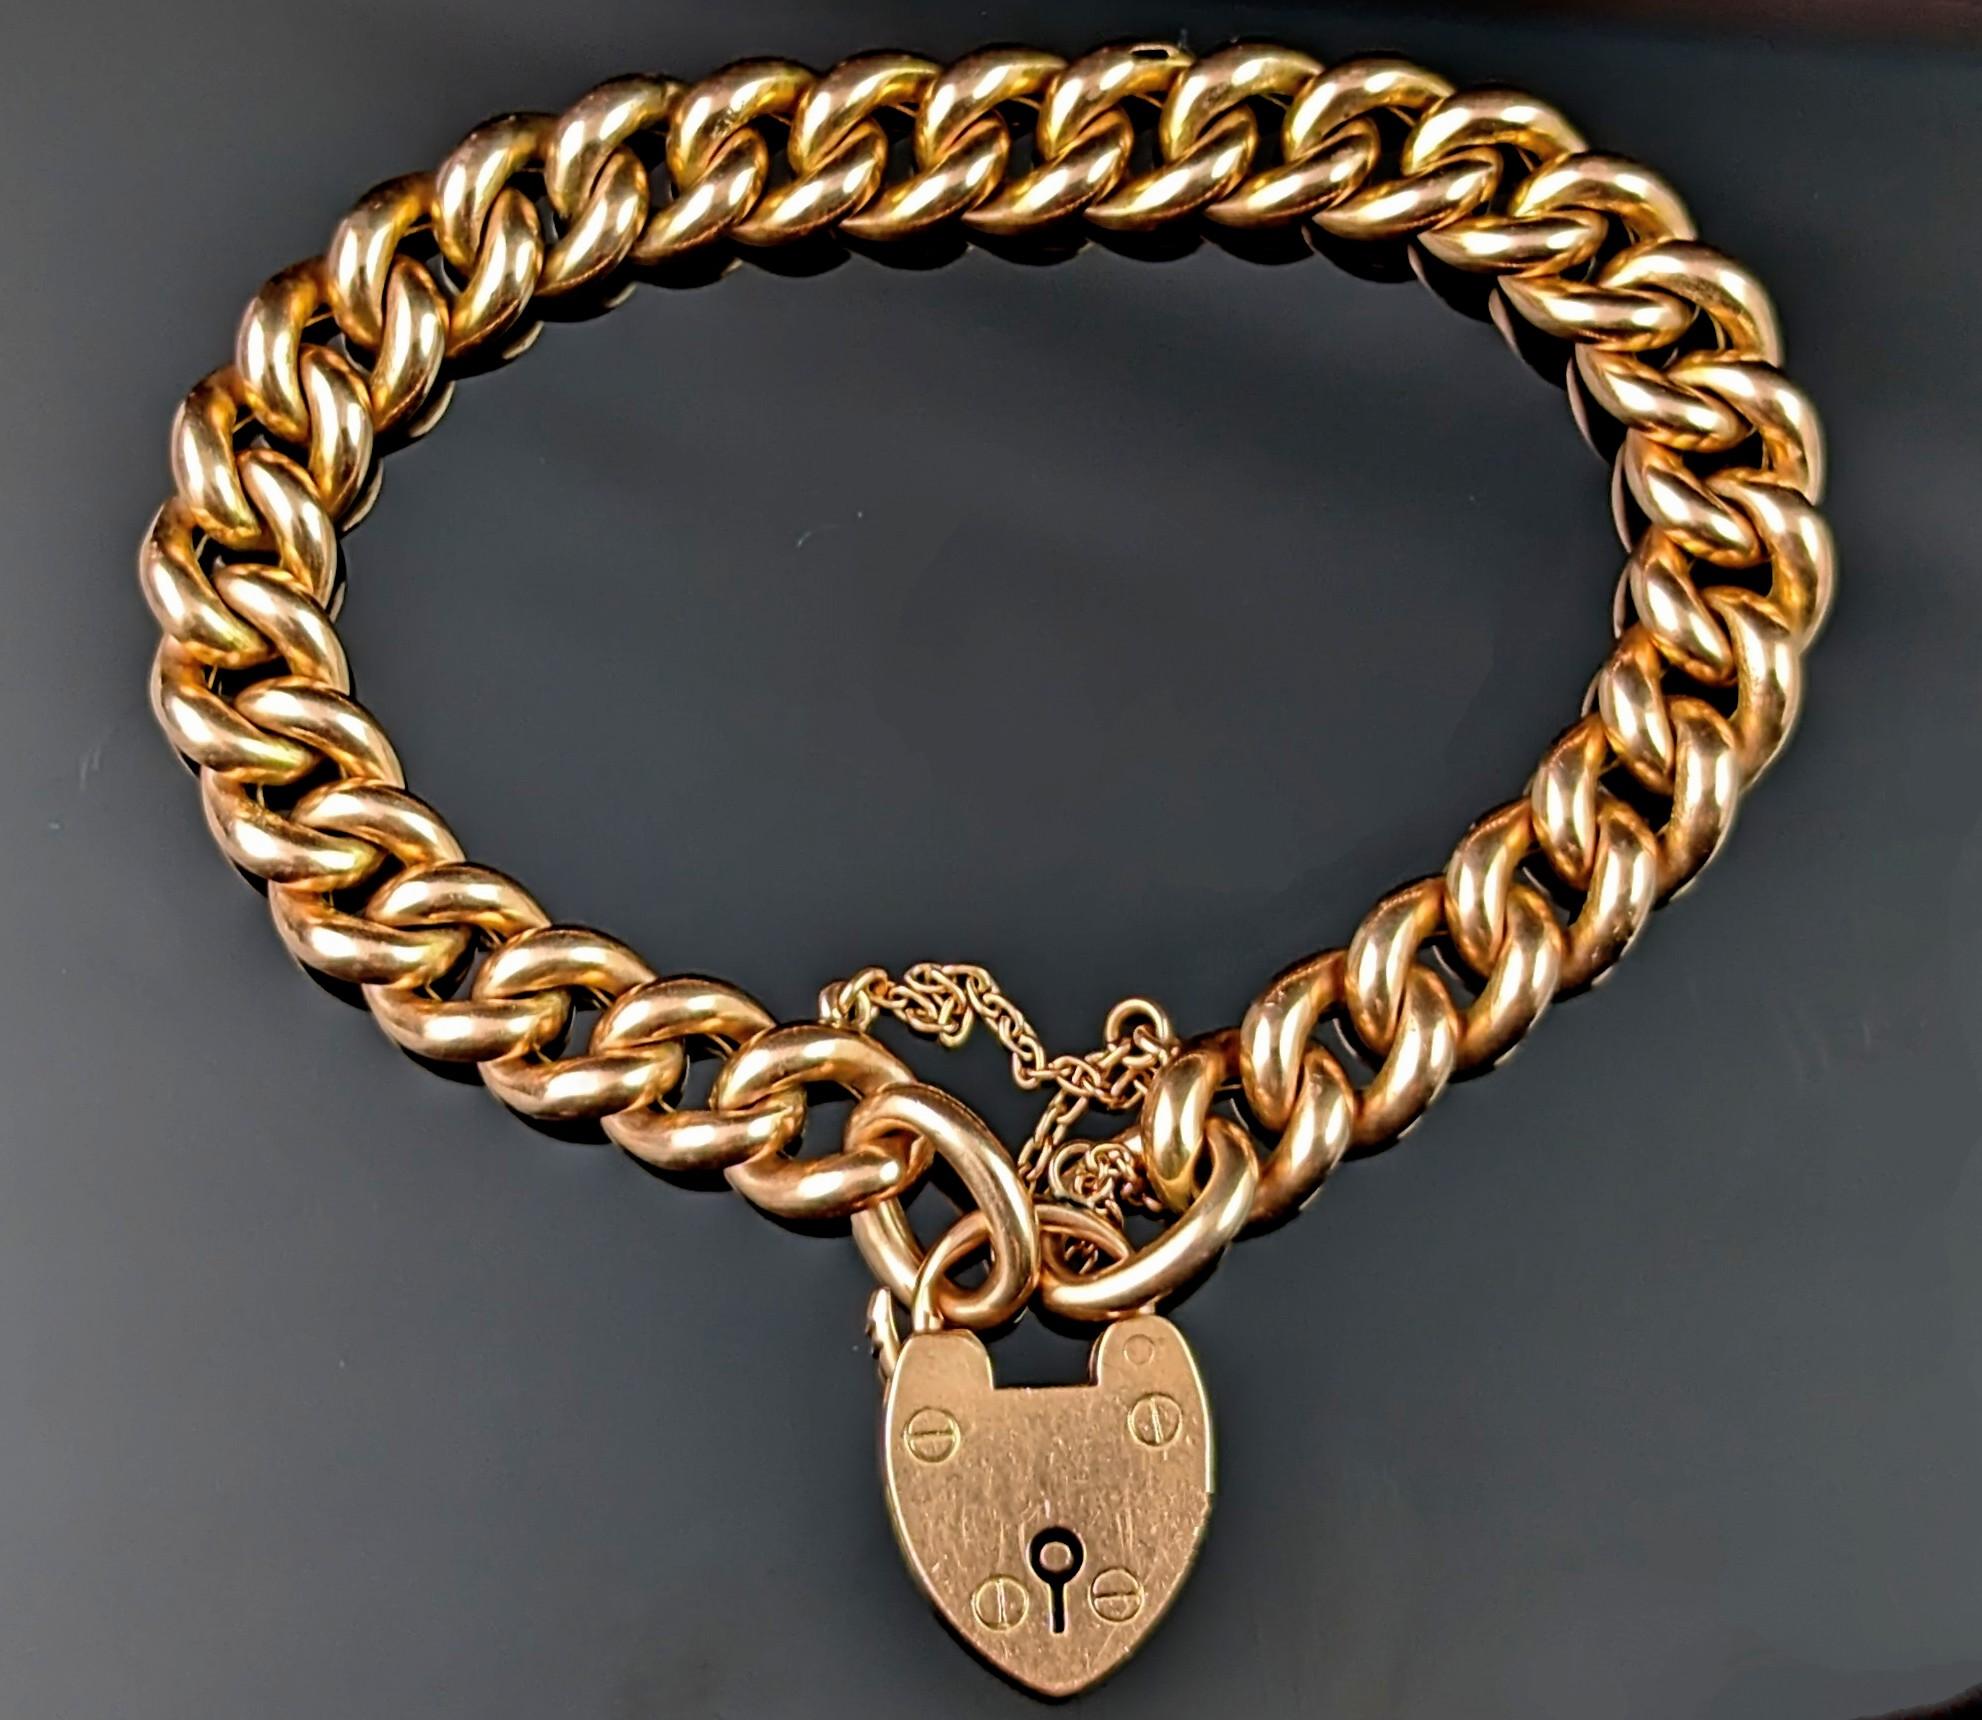 You can't go wrong with a stunning antique, late Victorian era 9ct gold curb bracelet such as this one.

Chunky rich, gold curb links with a sleek polished finish, designed to go effortlessly from day to night wear.

The gold has both yellow and